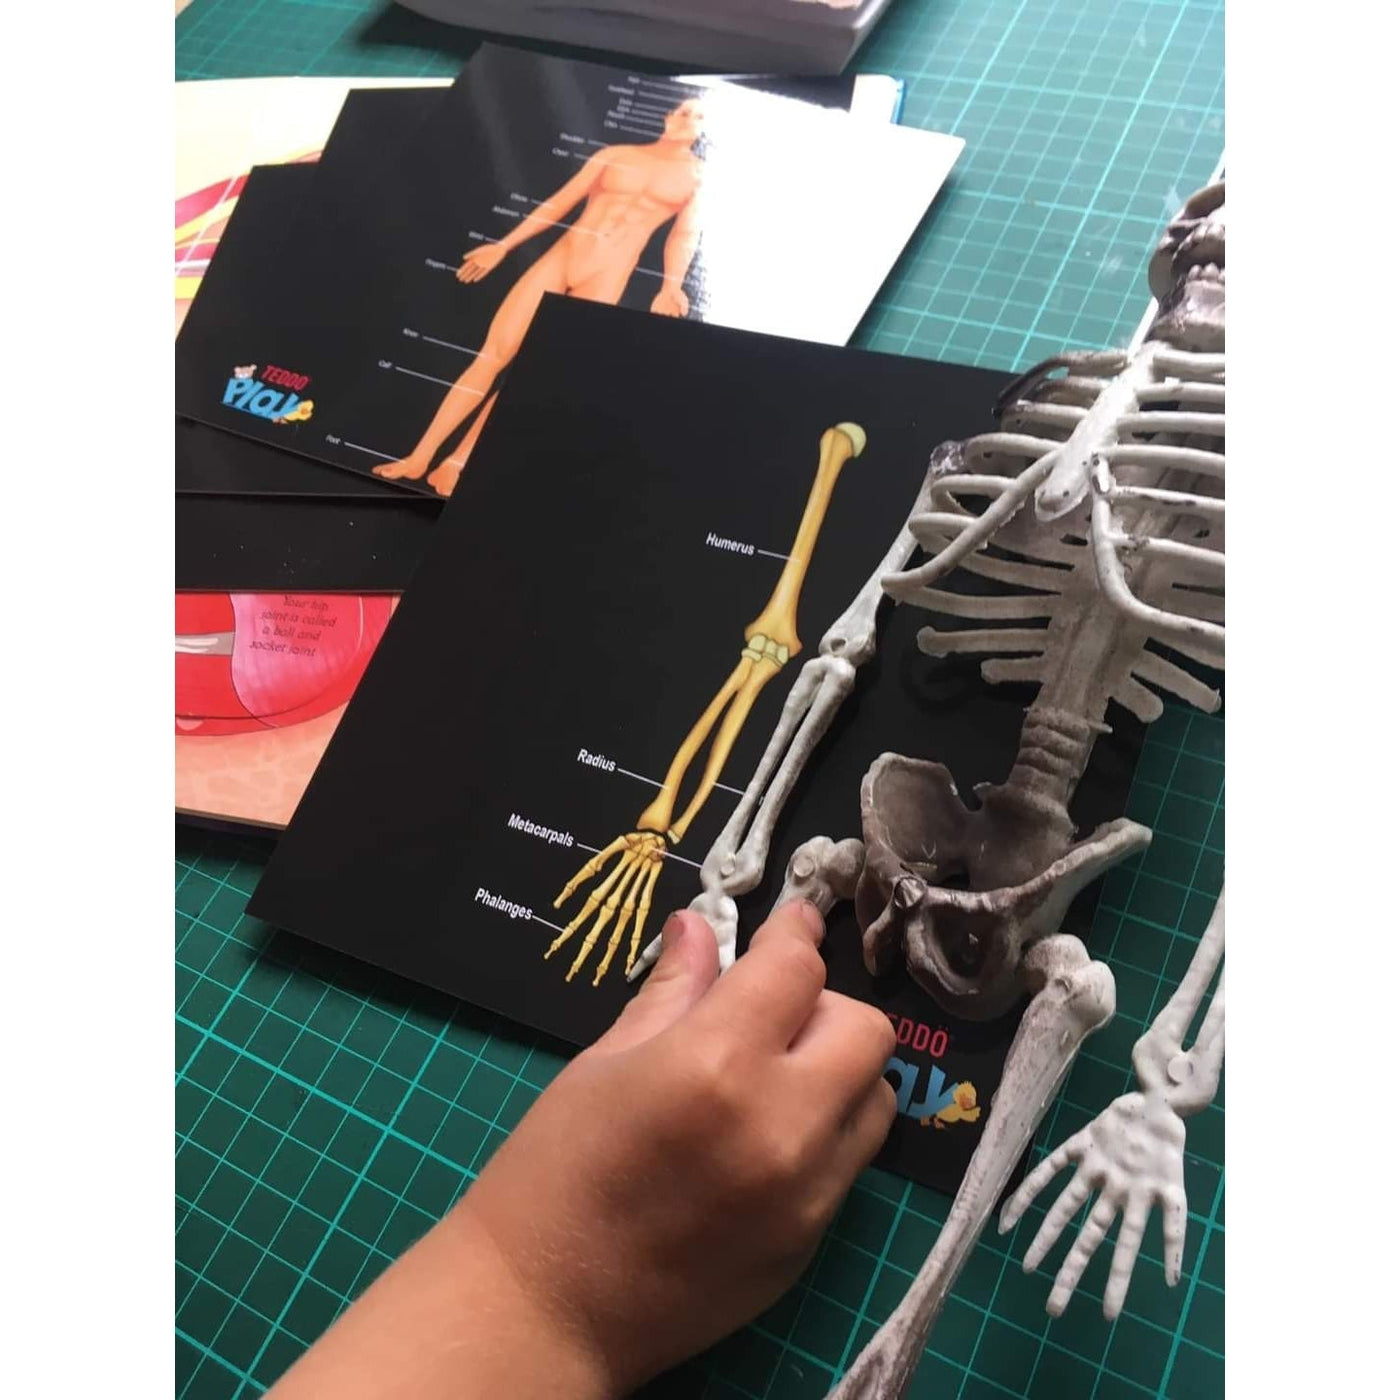 Teddo Play Our Bodies Inside and Out (Organs, Body Parts and Skeleton) - Set of 40 Educational Learning Cards